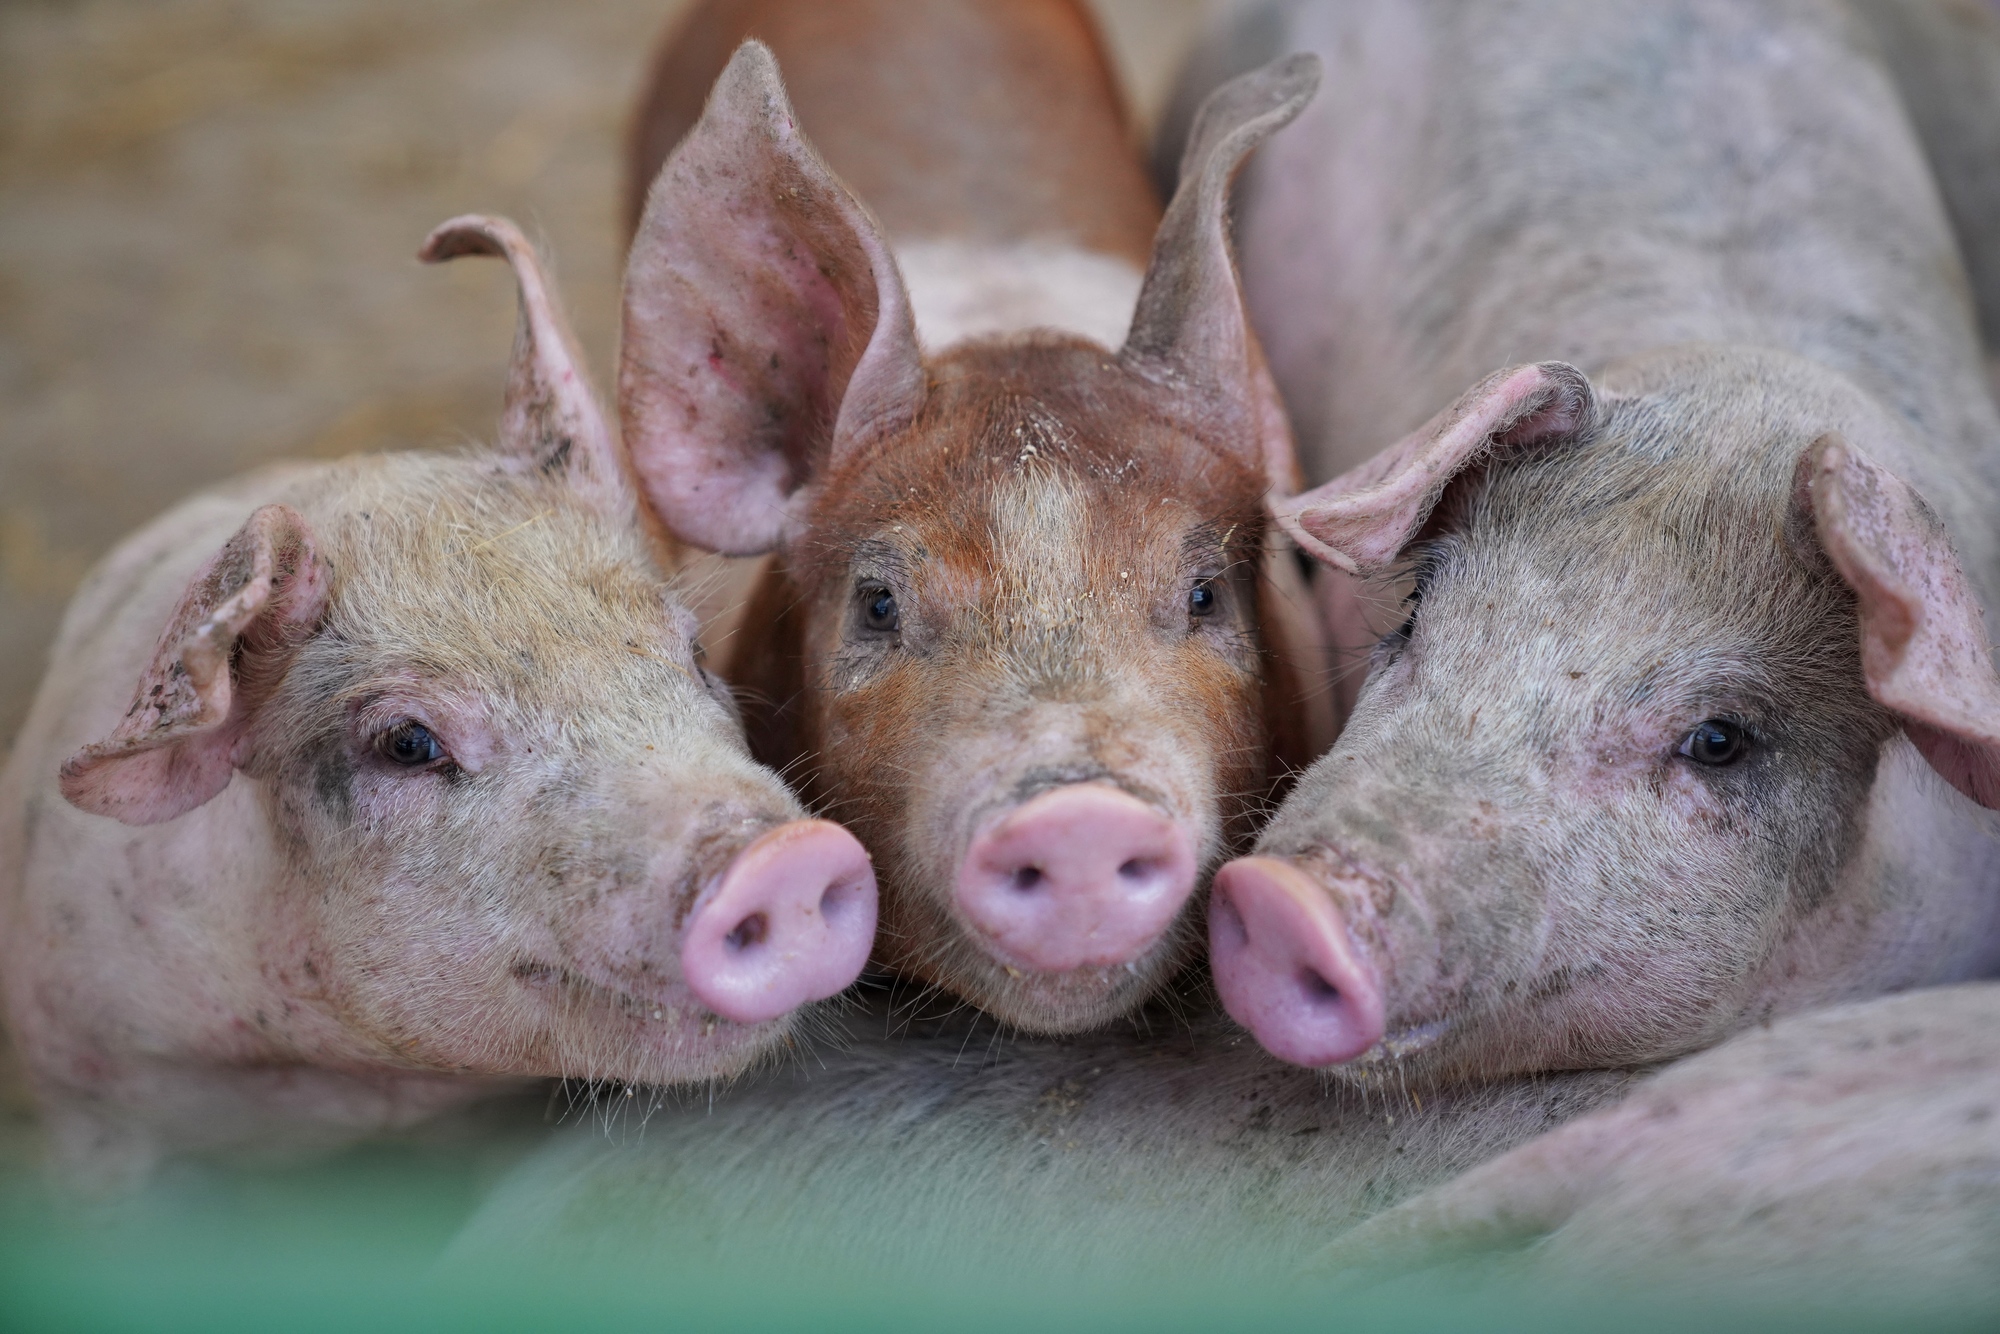 Niman Ranch pigs are raised on pasture or in deeply bedded pens sustainably and humanely by independent family farmers. Photo: Vincent and Holly Crawford